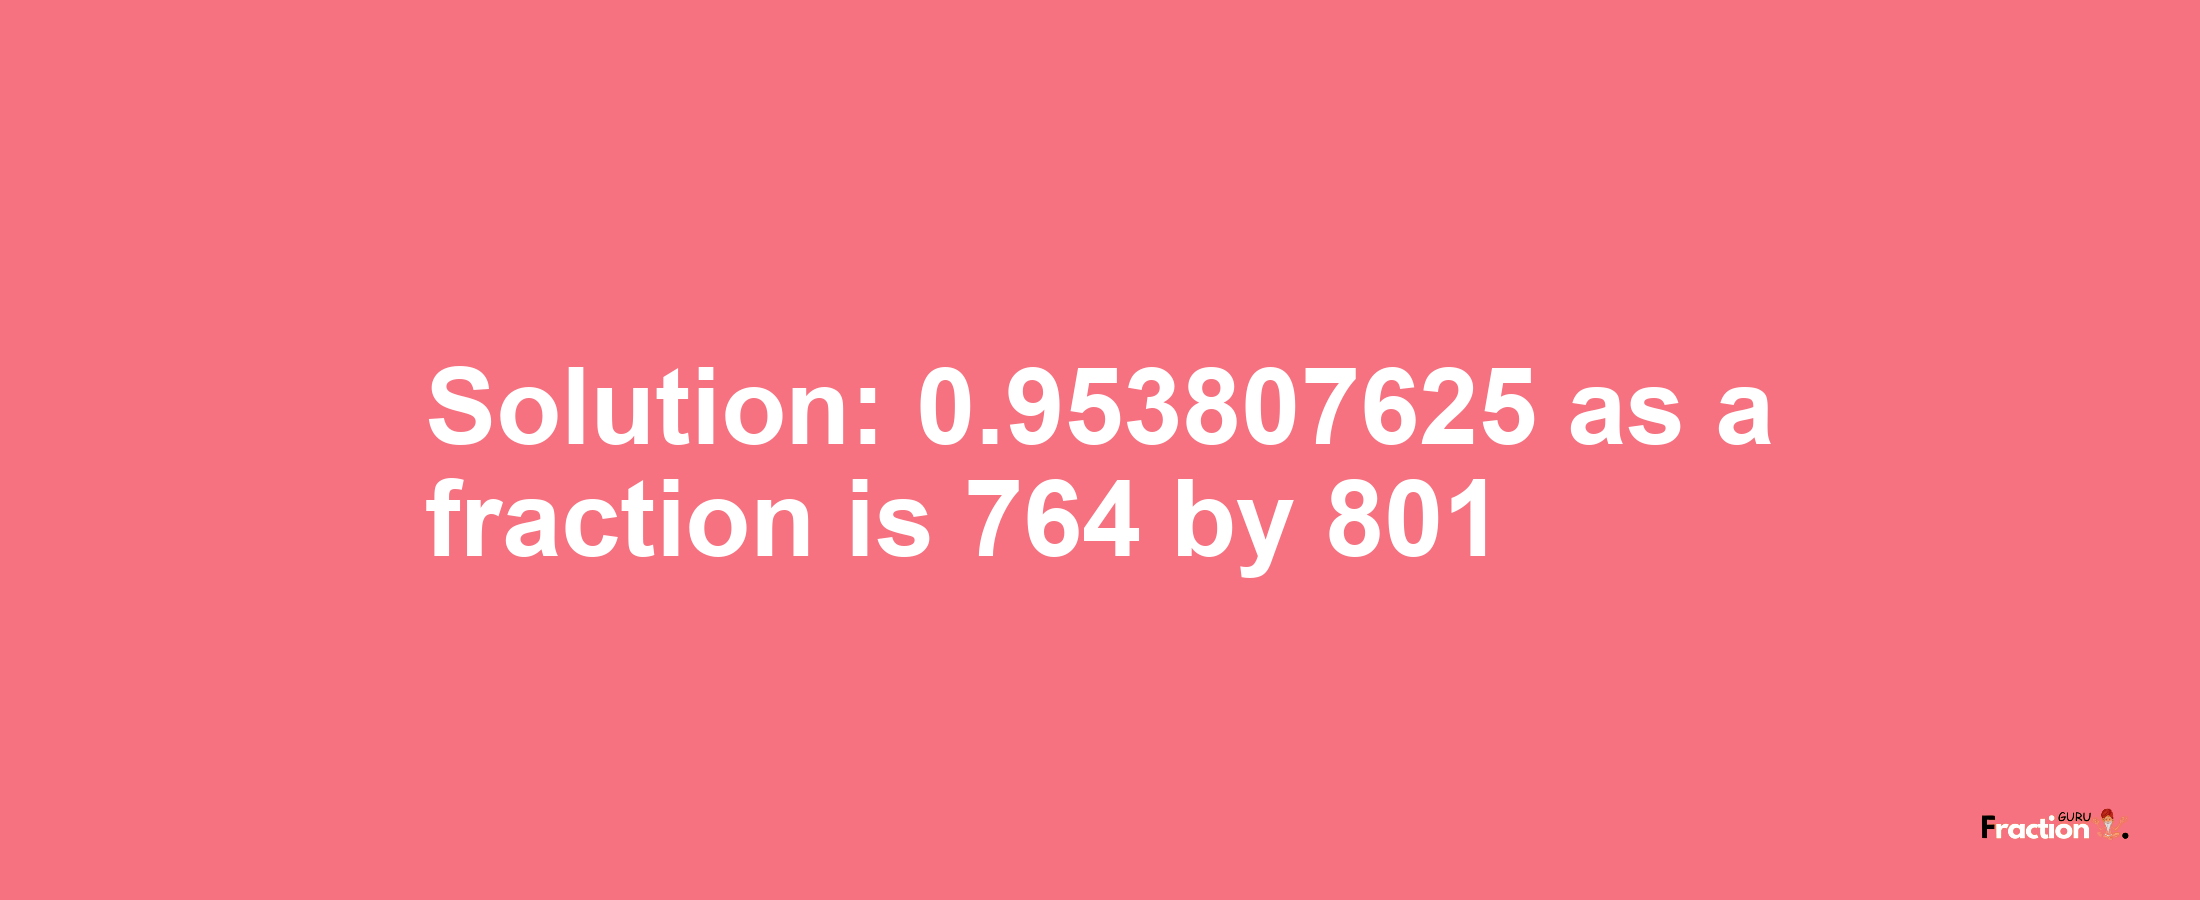 Solution:0.953807625 as a fraction is 764/801